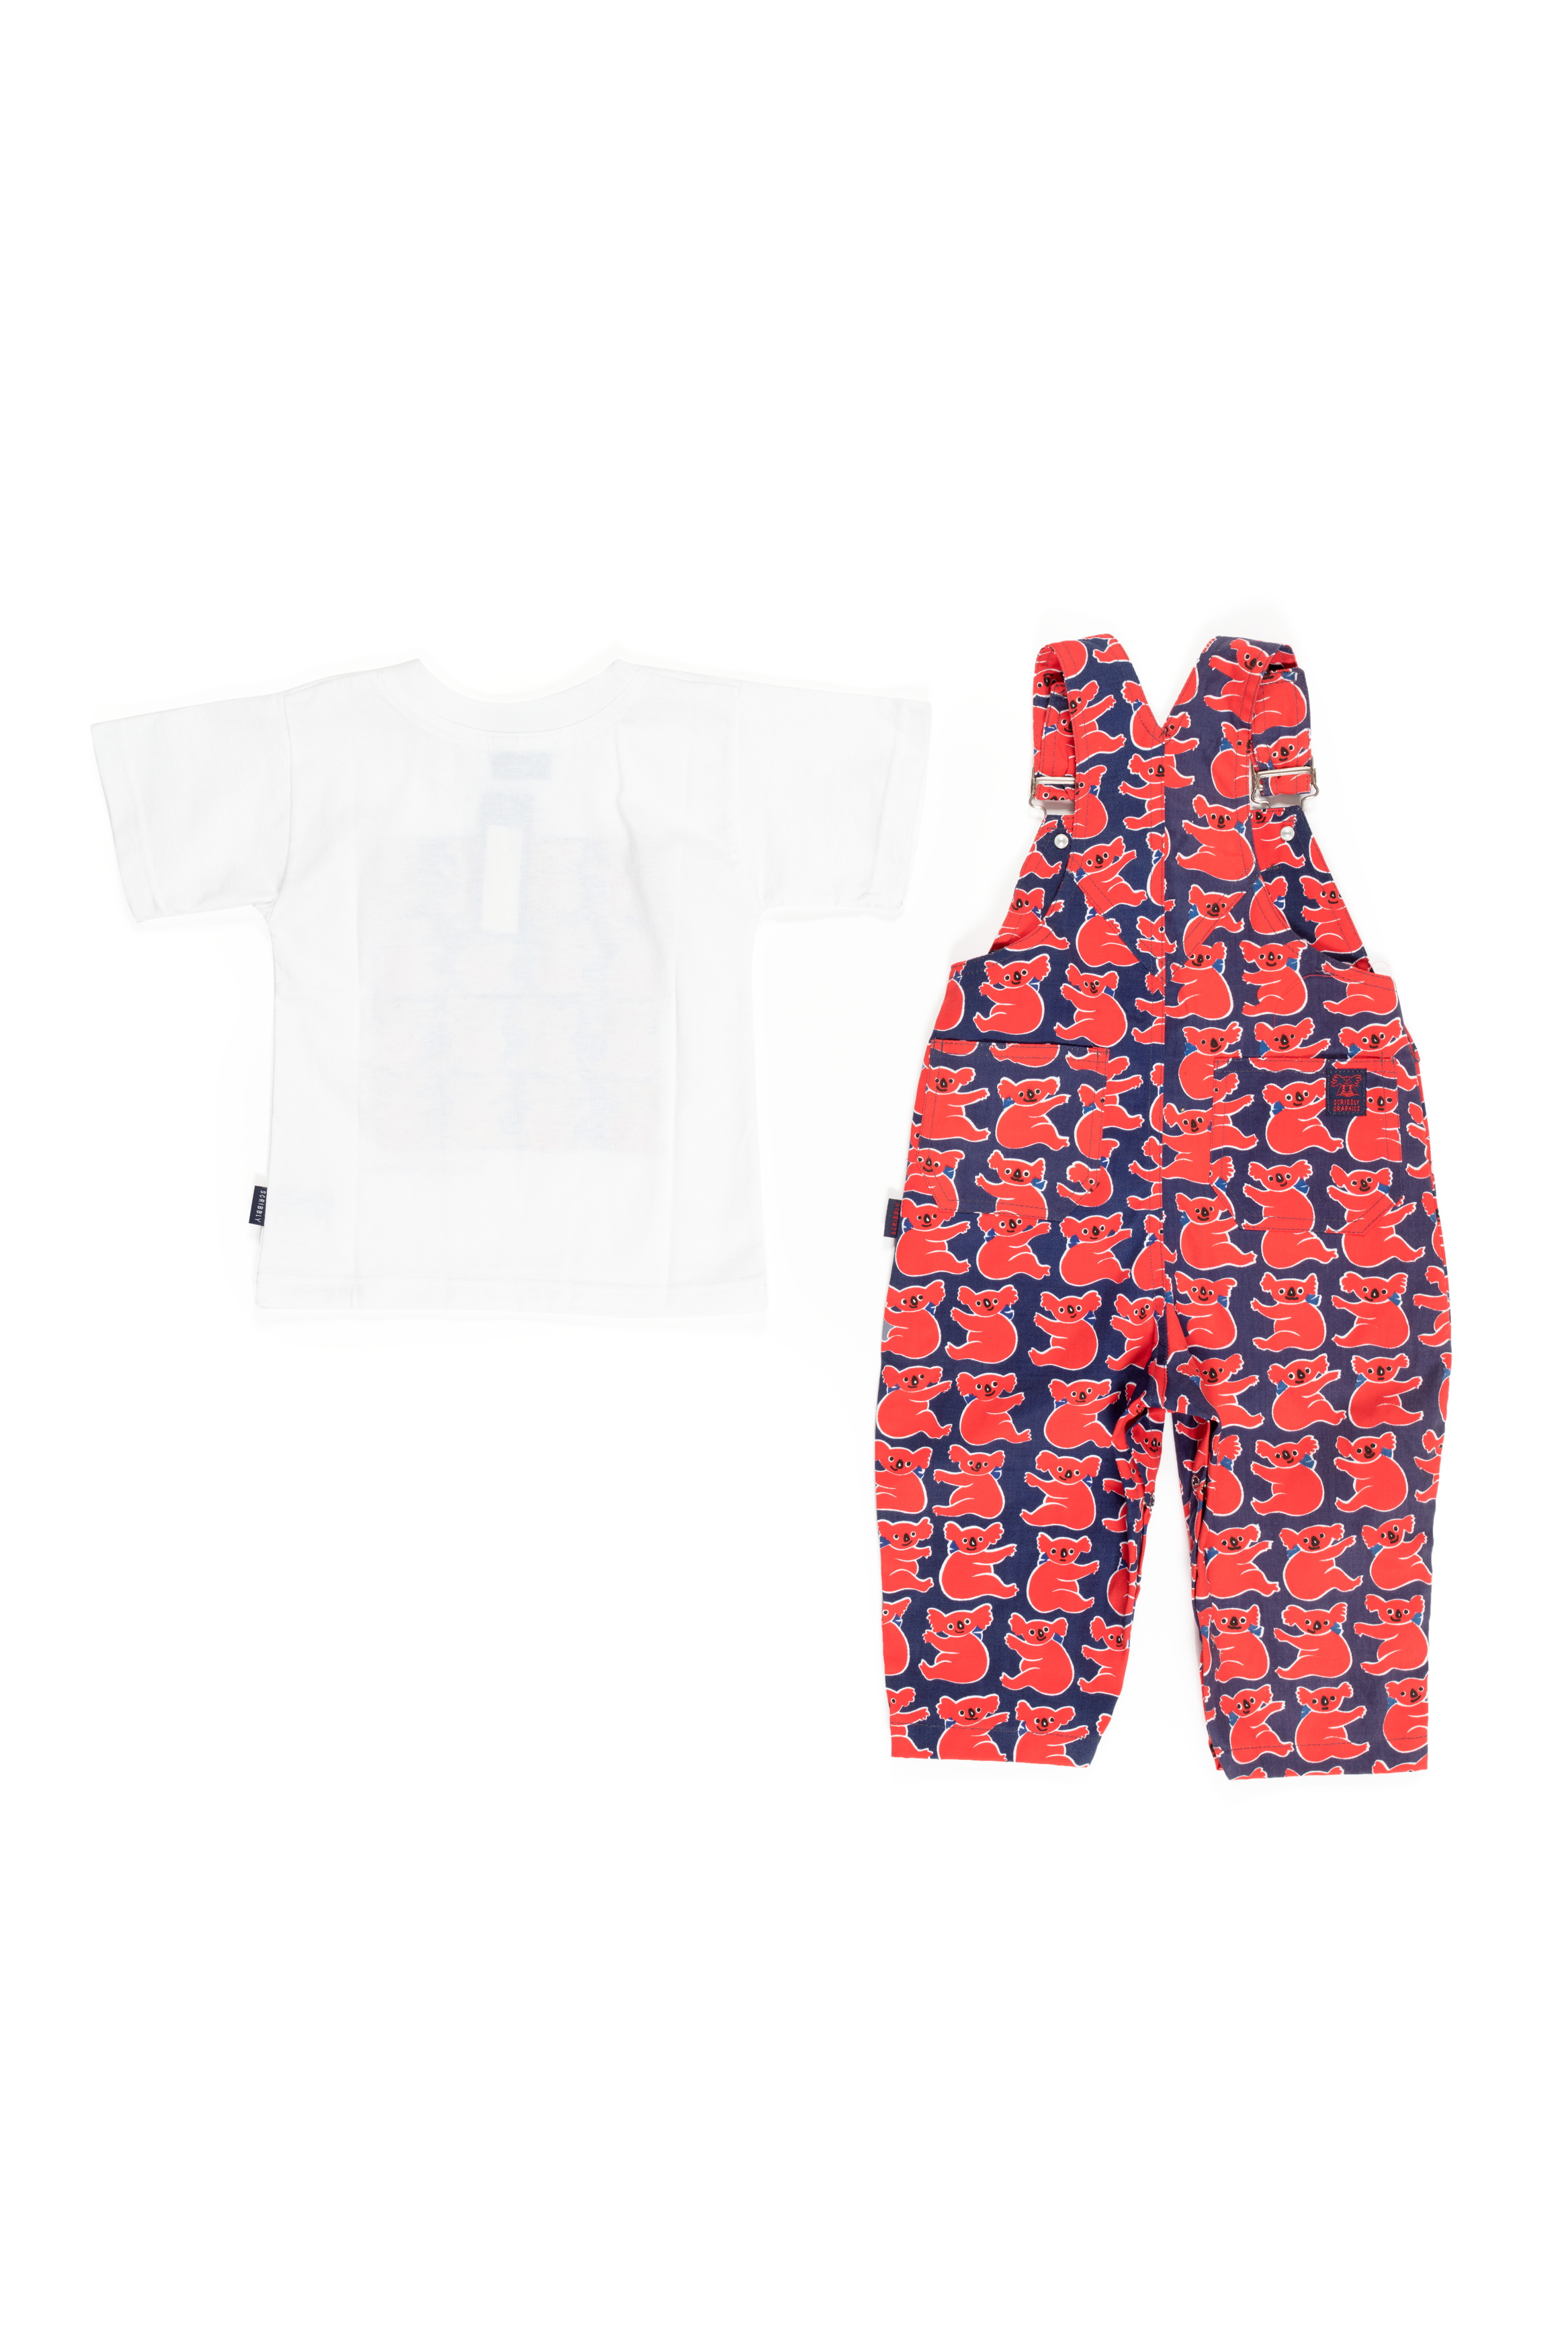 Scribbly Graphics overalls and t-shirt